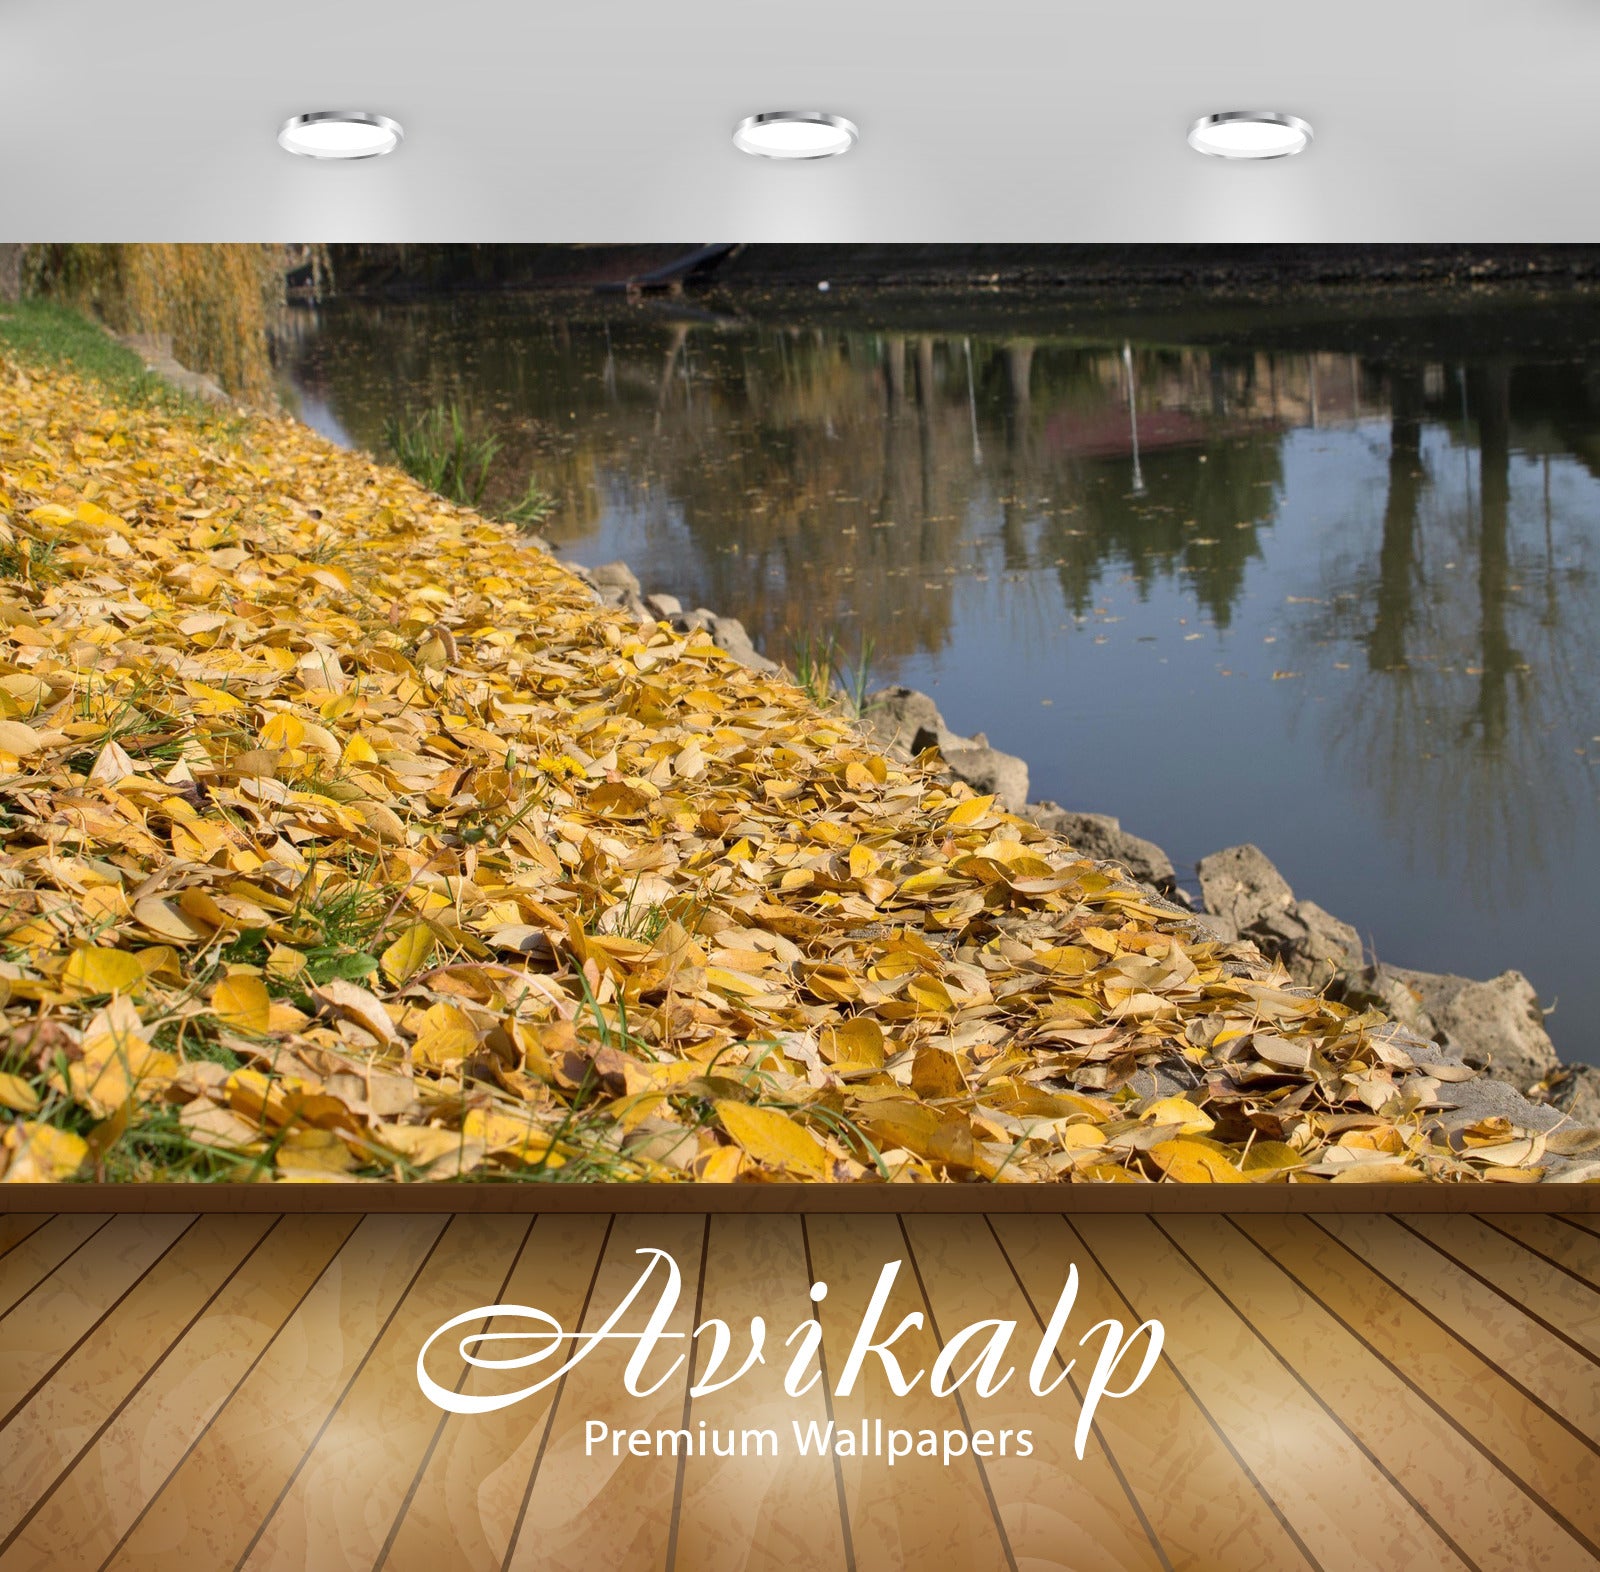 Avikalp Exclusive Awi6748 Yellow Leaf Carpet By The River Nature Full HD Wallpapers for Living room,